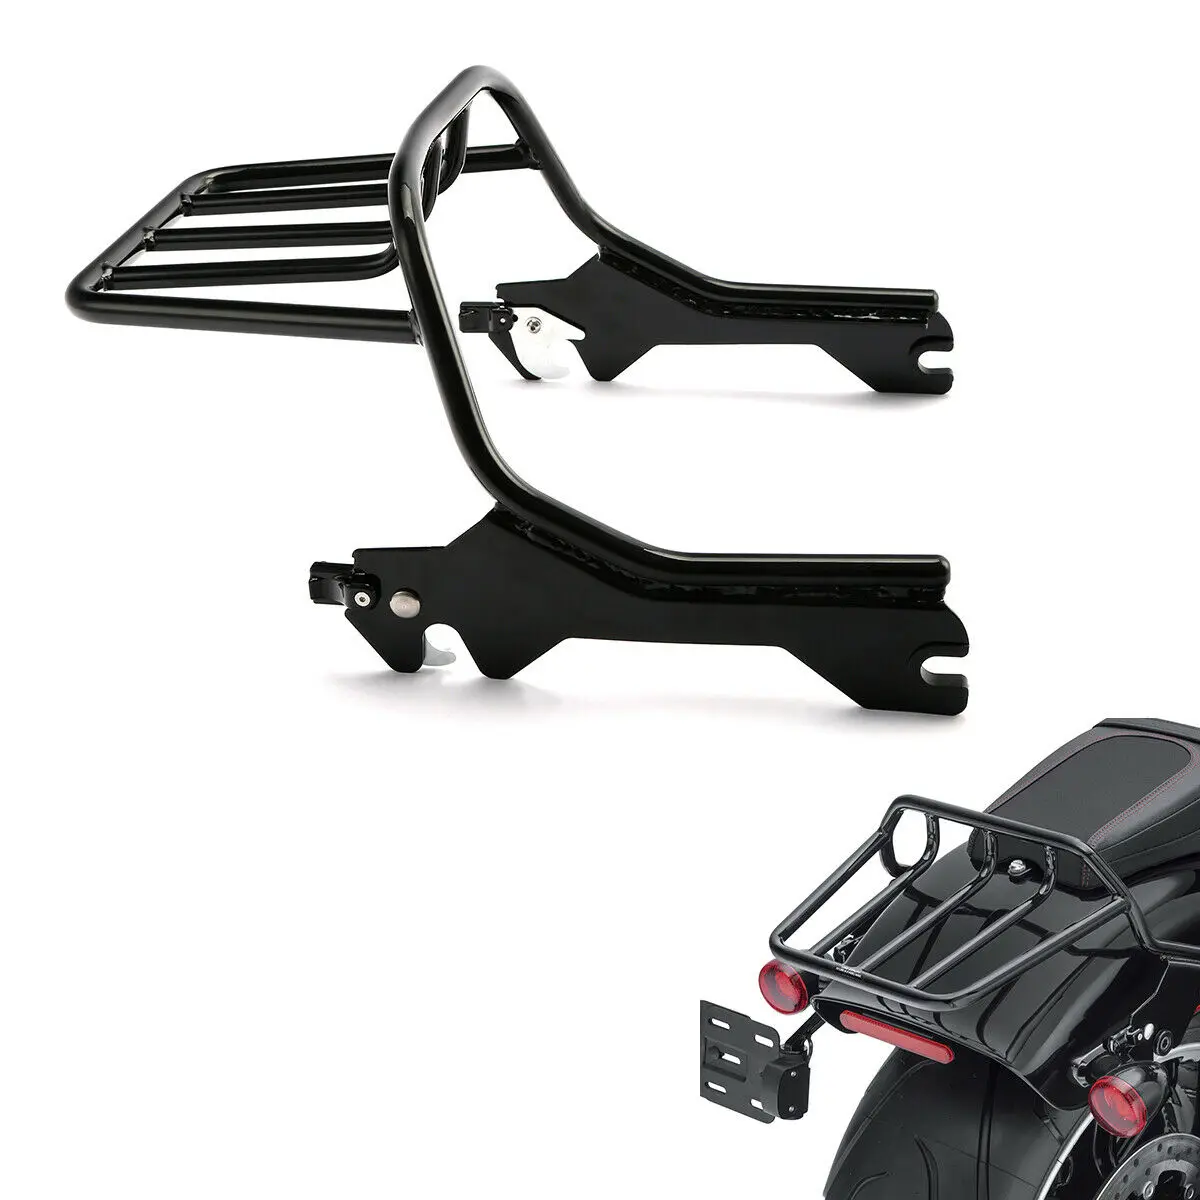 

Motorcycle Two Up Luggage Rack For Harley Breakout FXBR Fat Boy FLFB 2018-2019 Breakout 114 FXBRS 2018-2020 19 Fat Boy 114 FLFBS